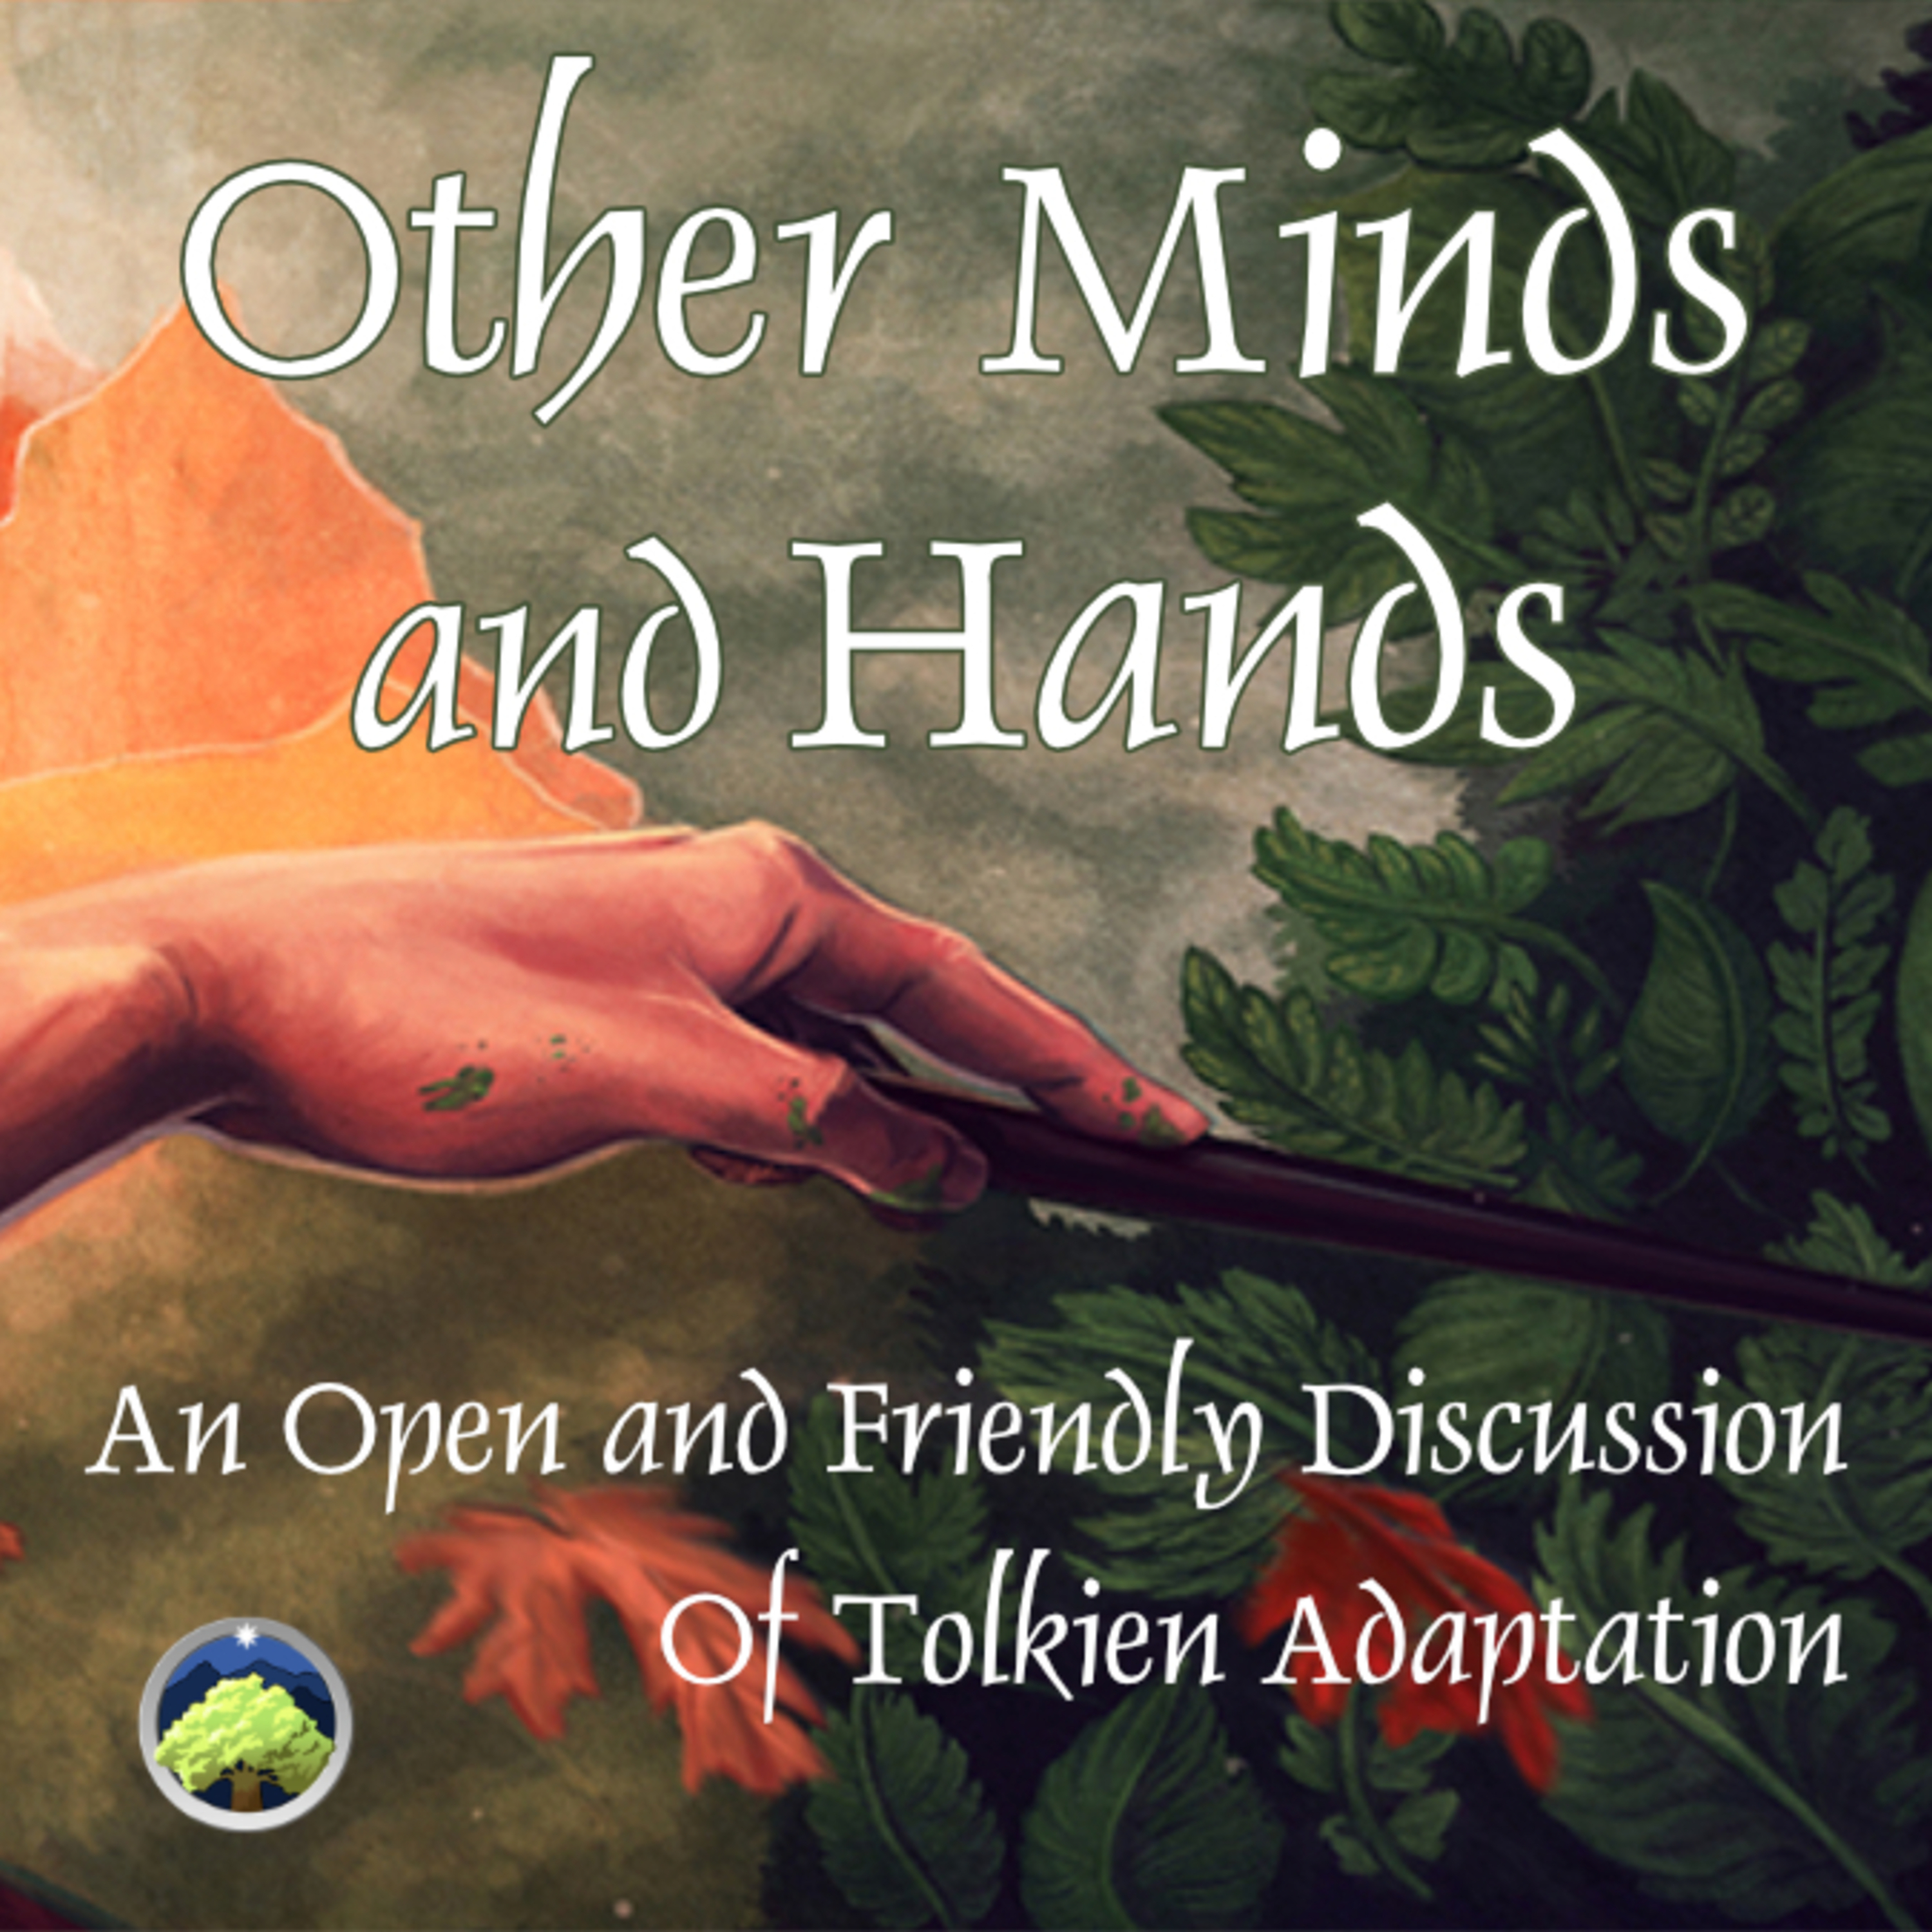 544: Other Minds and Hands, Episode 54